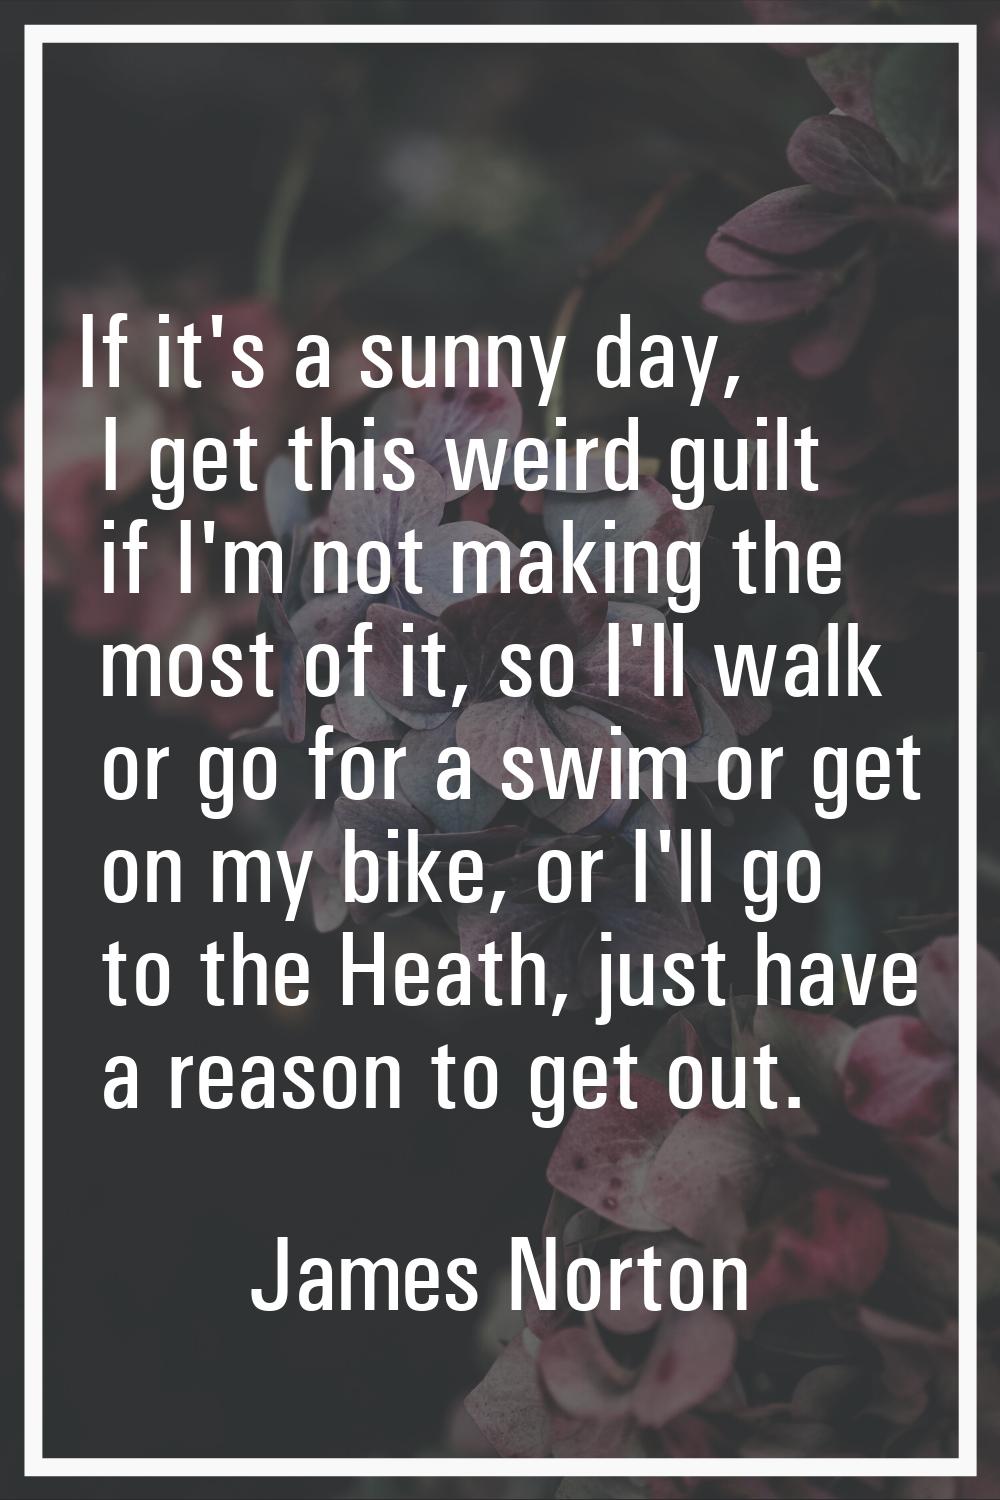 If it's a sunny day, I get this weird guilt if I'm not making the most of it, so I'll walk or go fo